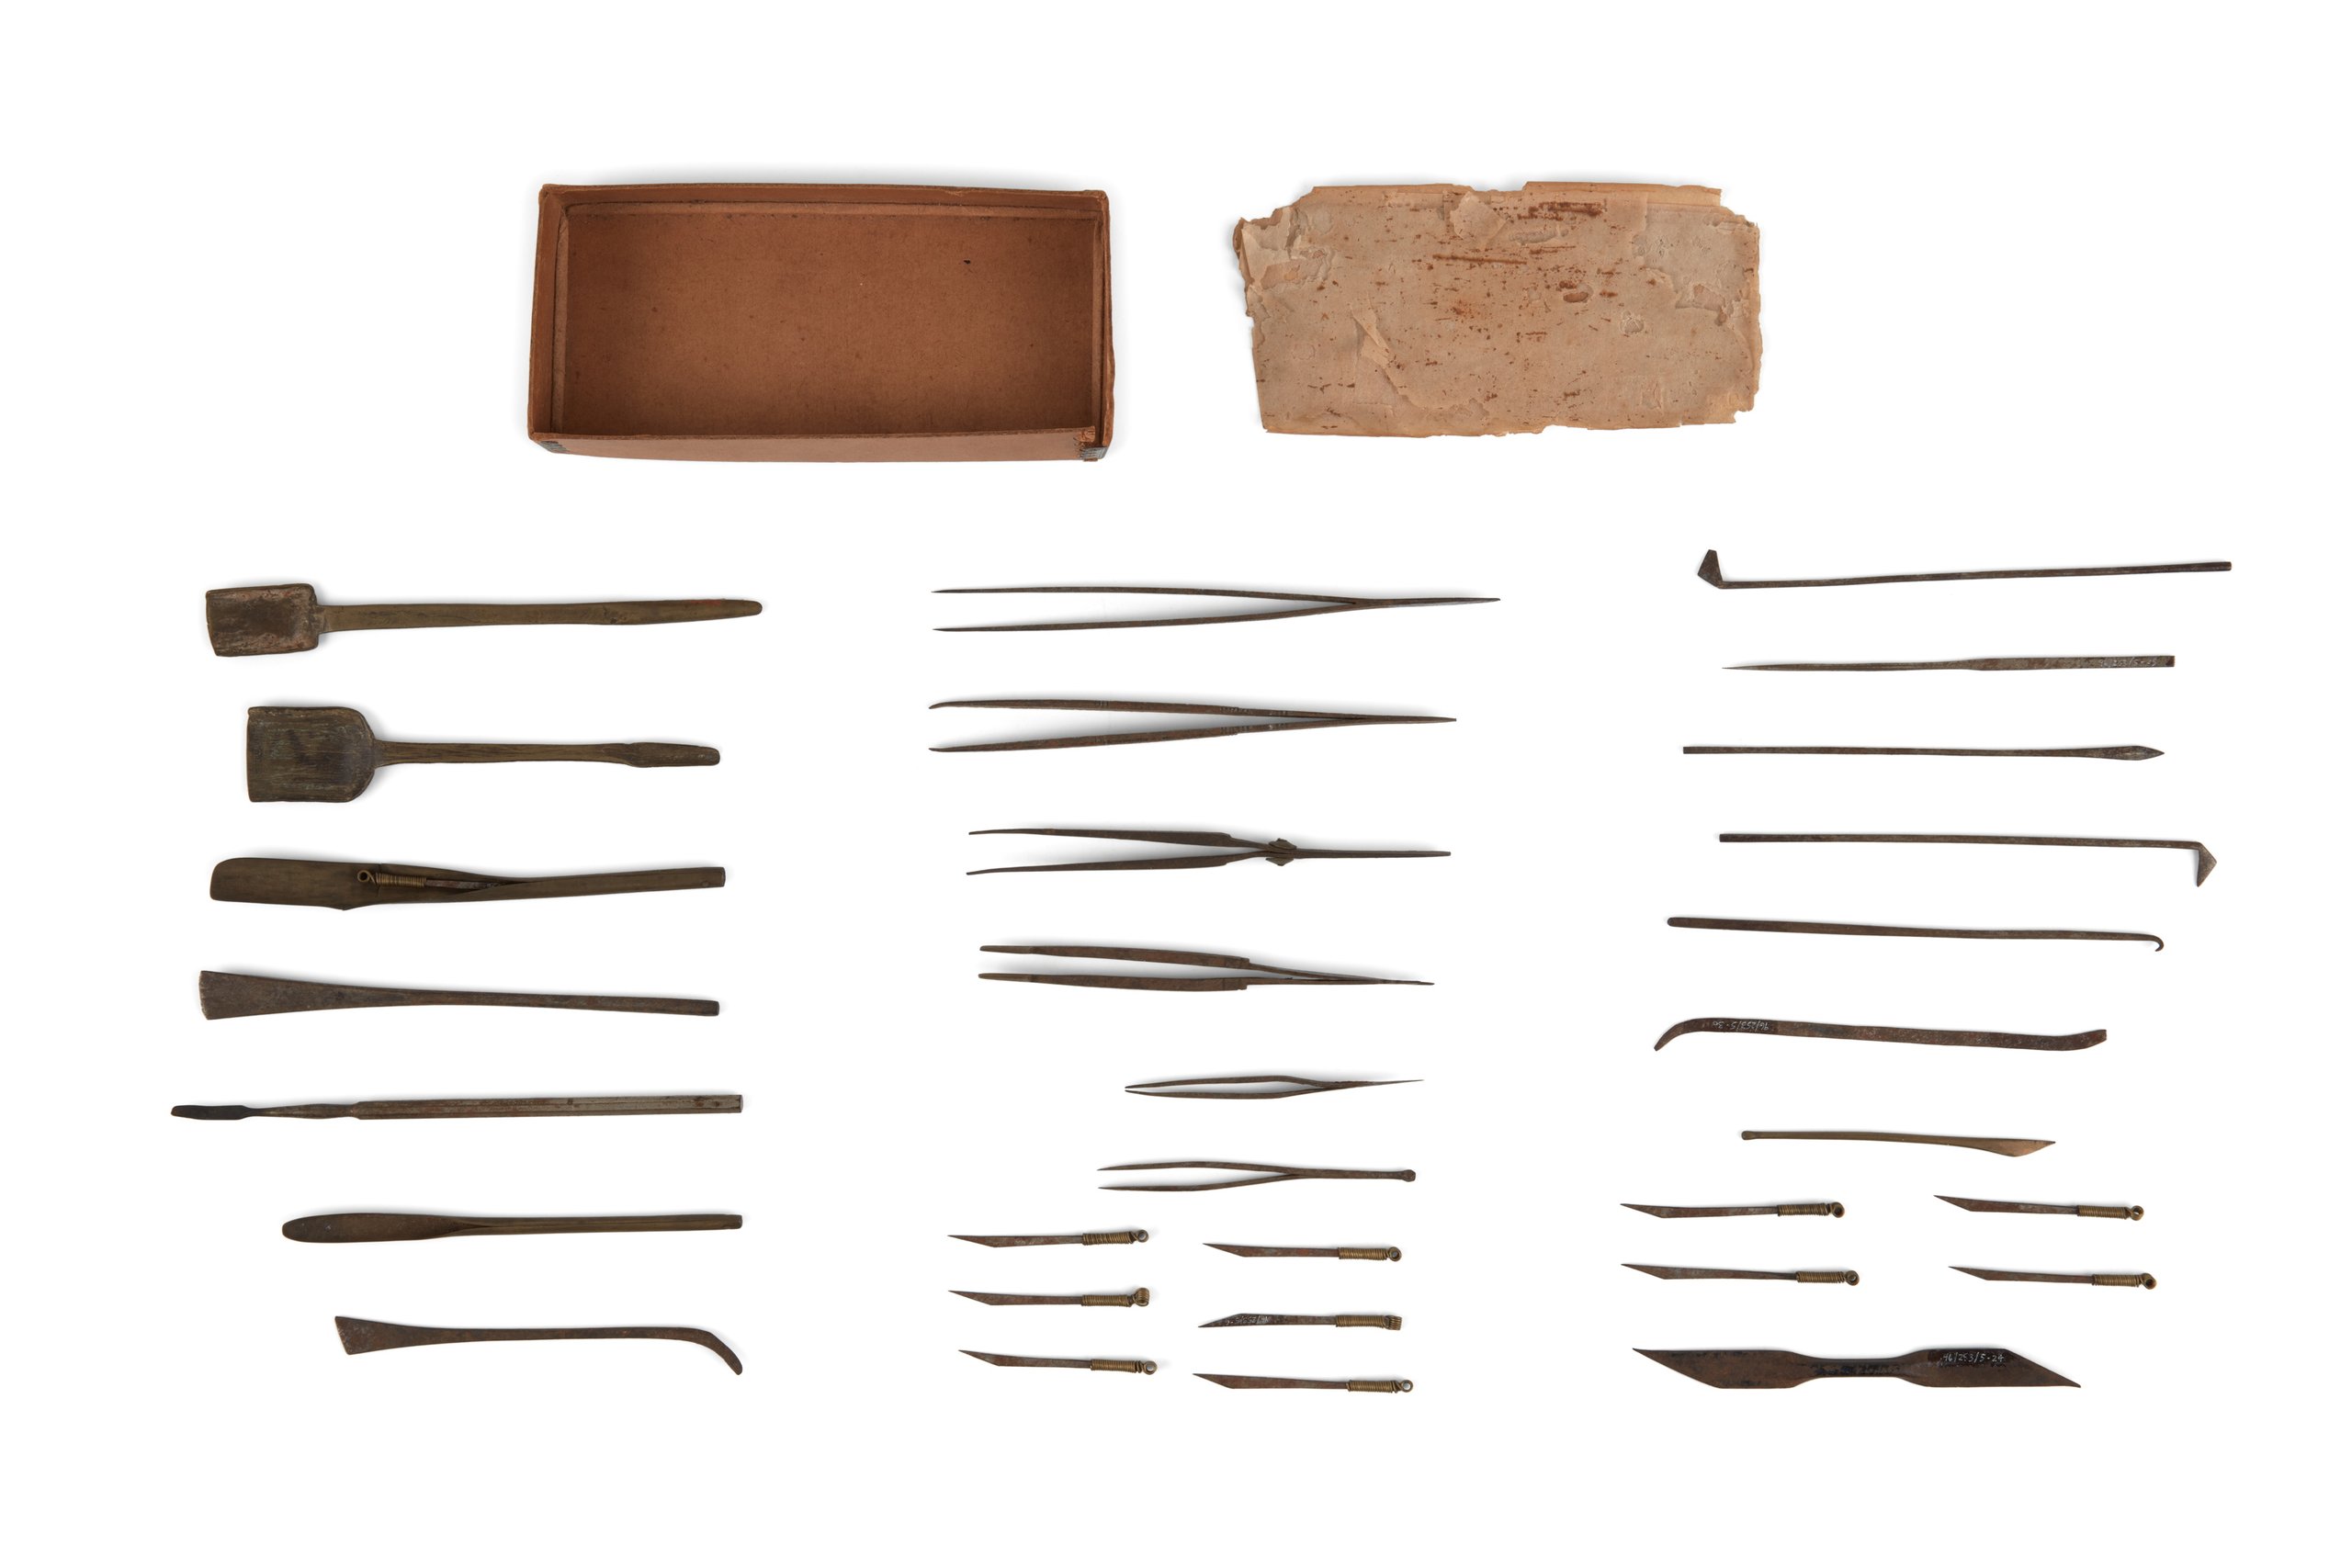 Collection of medical and surgical tools from China